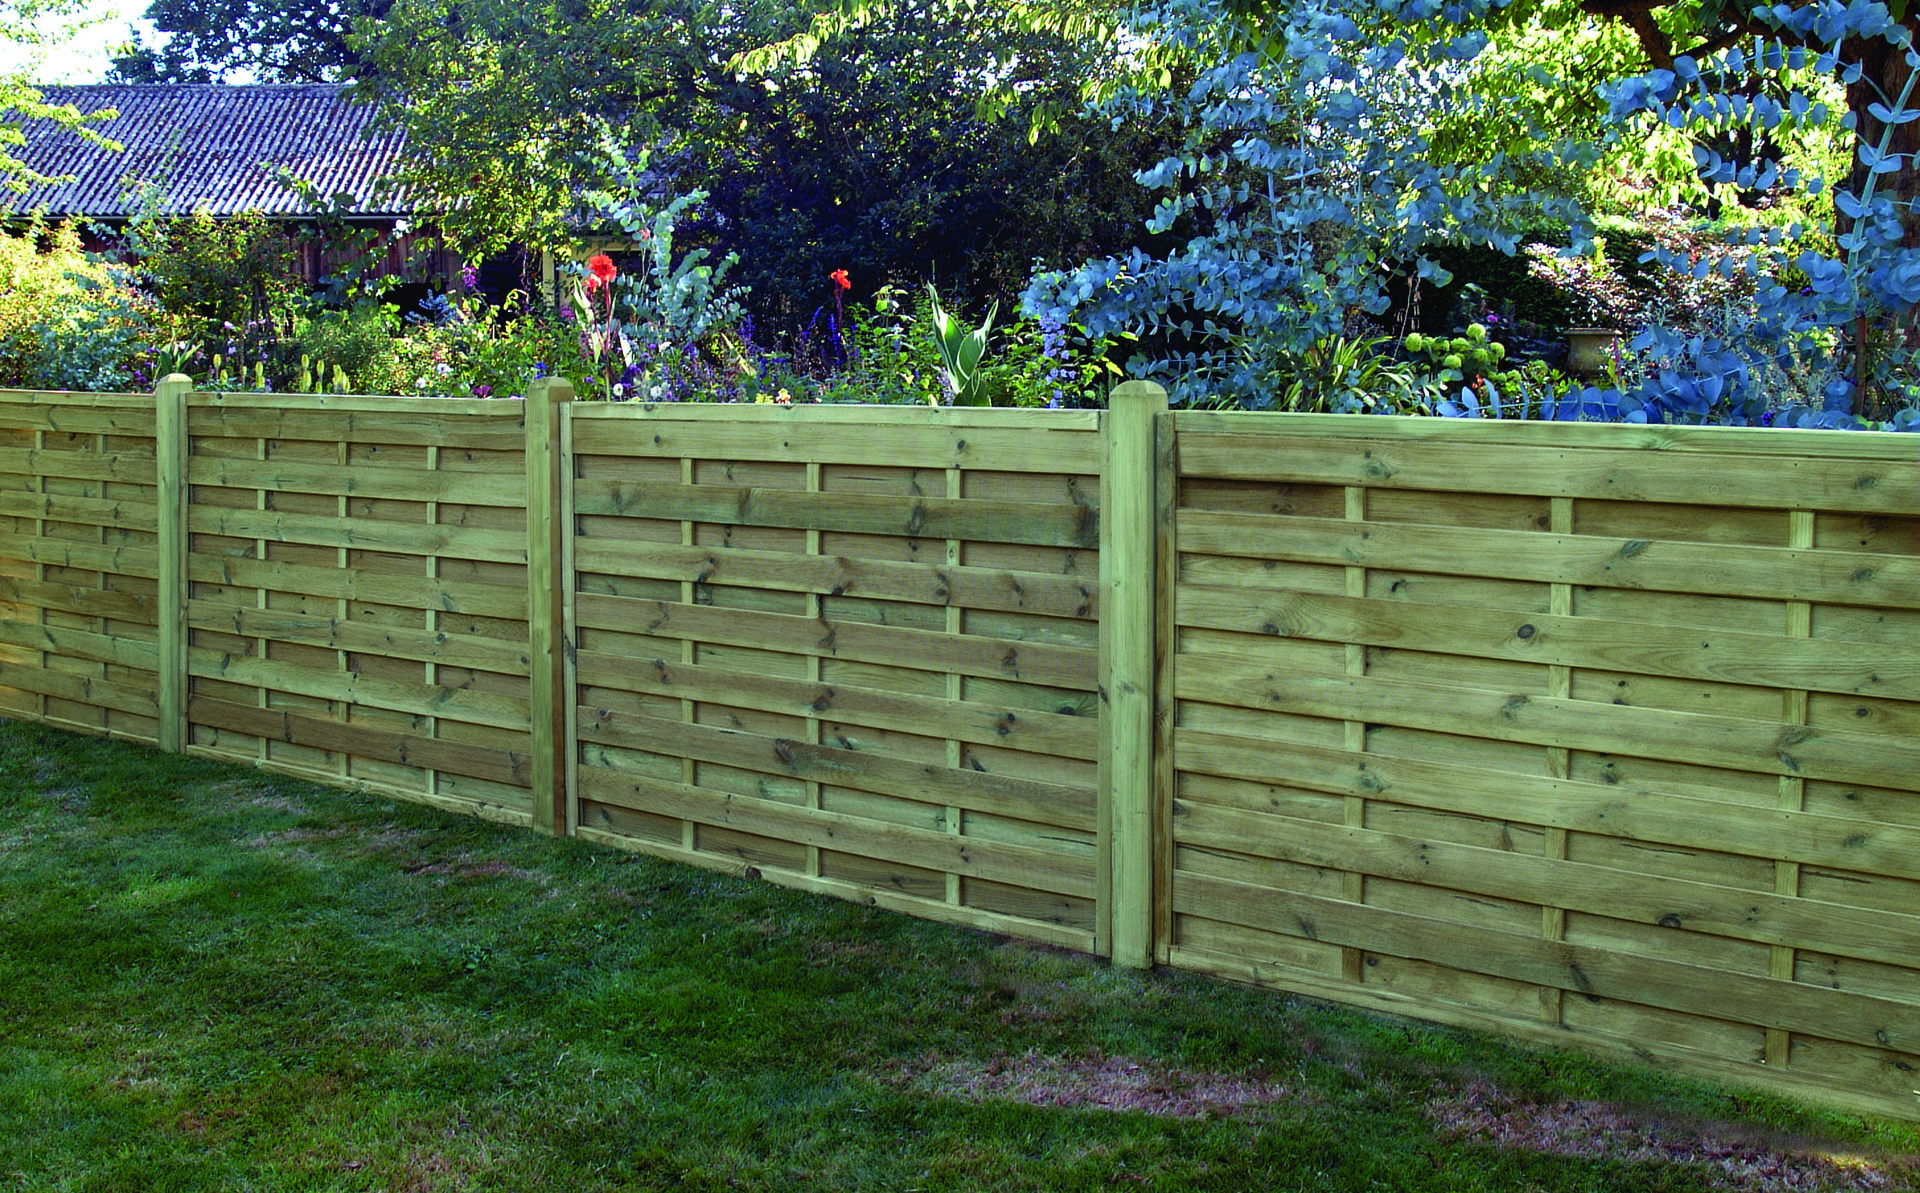 A fence in a garden on a summer's day